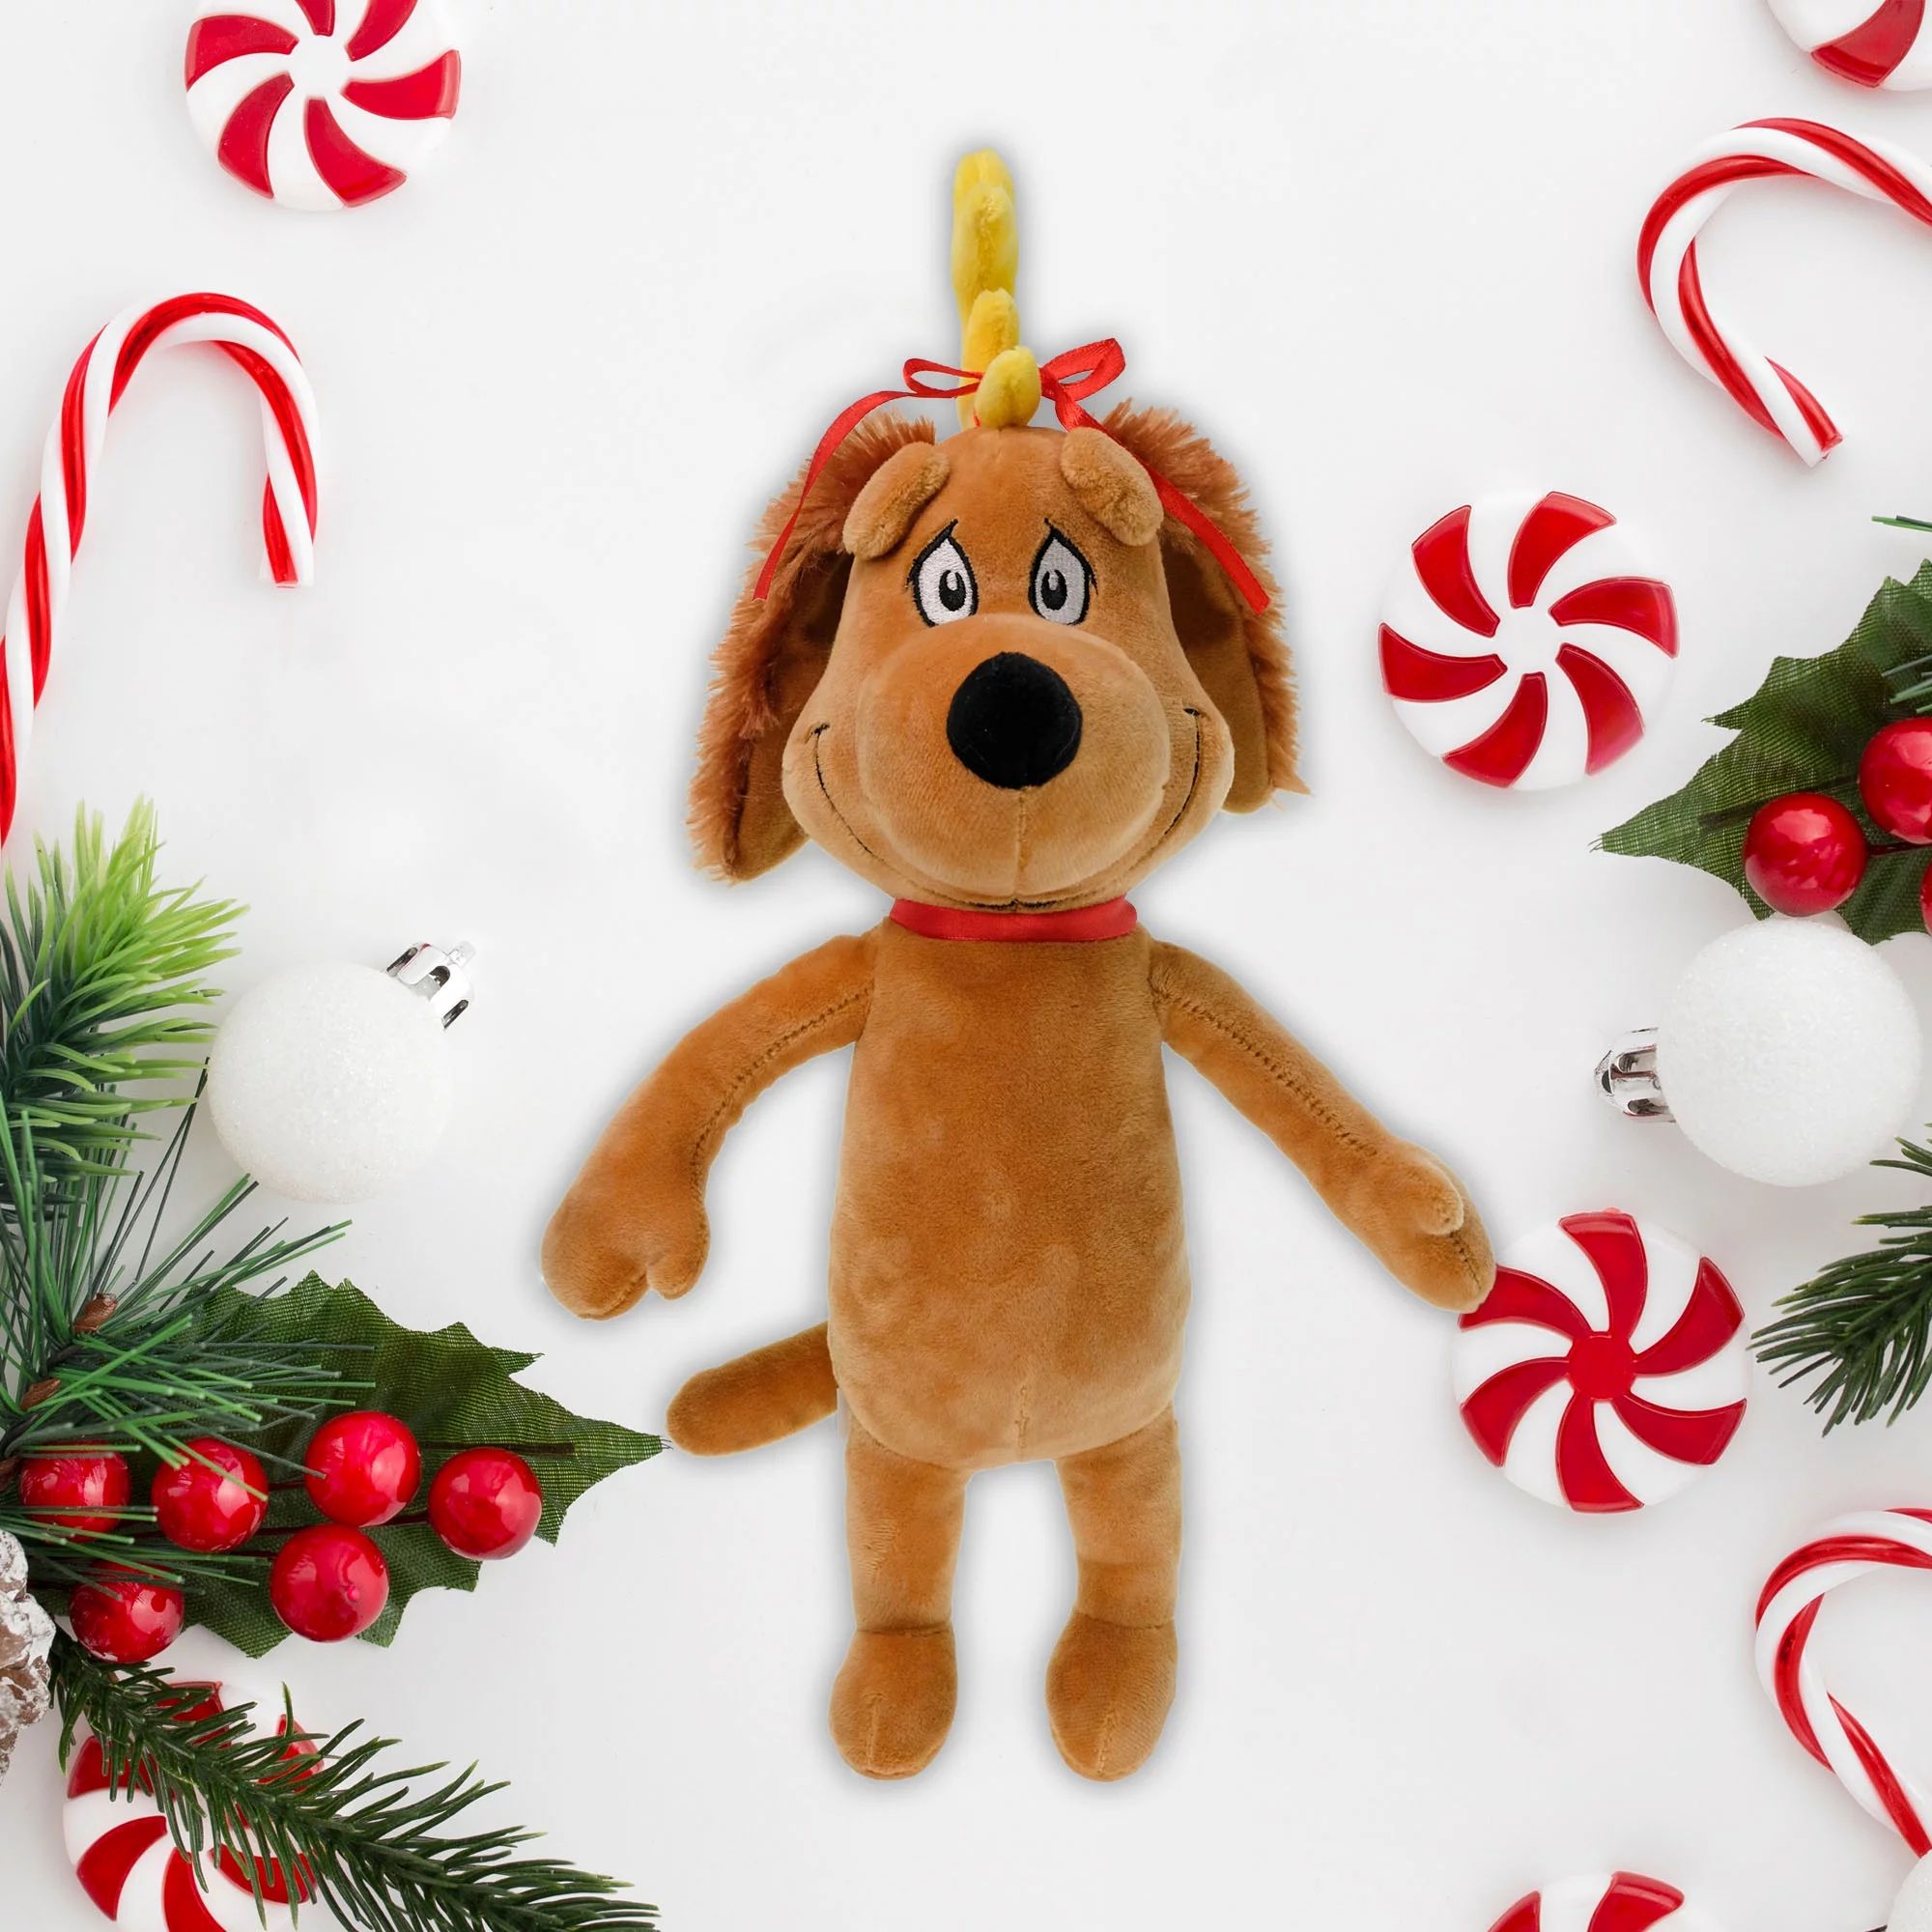 Dr Seuss' The Grinch Who Stole Christmas, Max With Reindeer Antlers Plush, 13 inches Tall | Walmart (US)